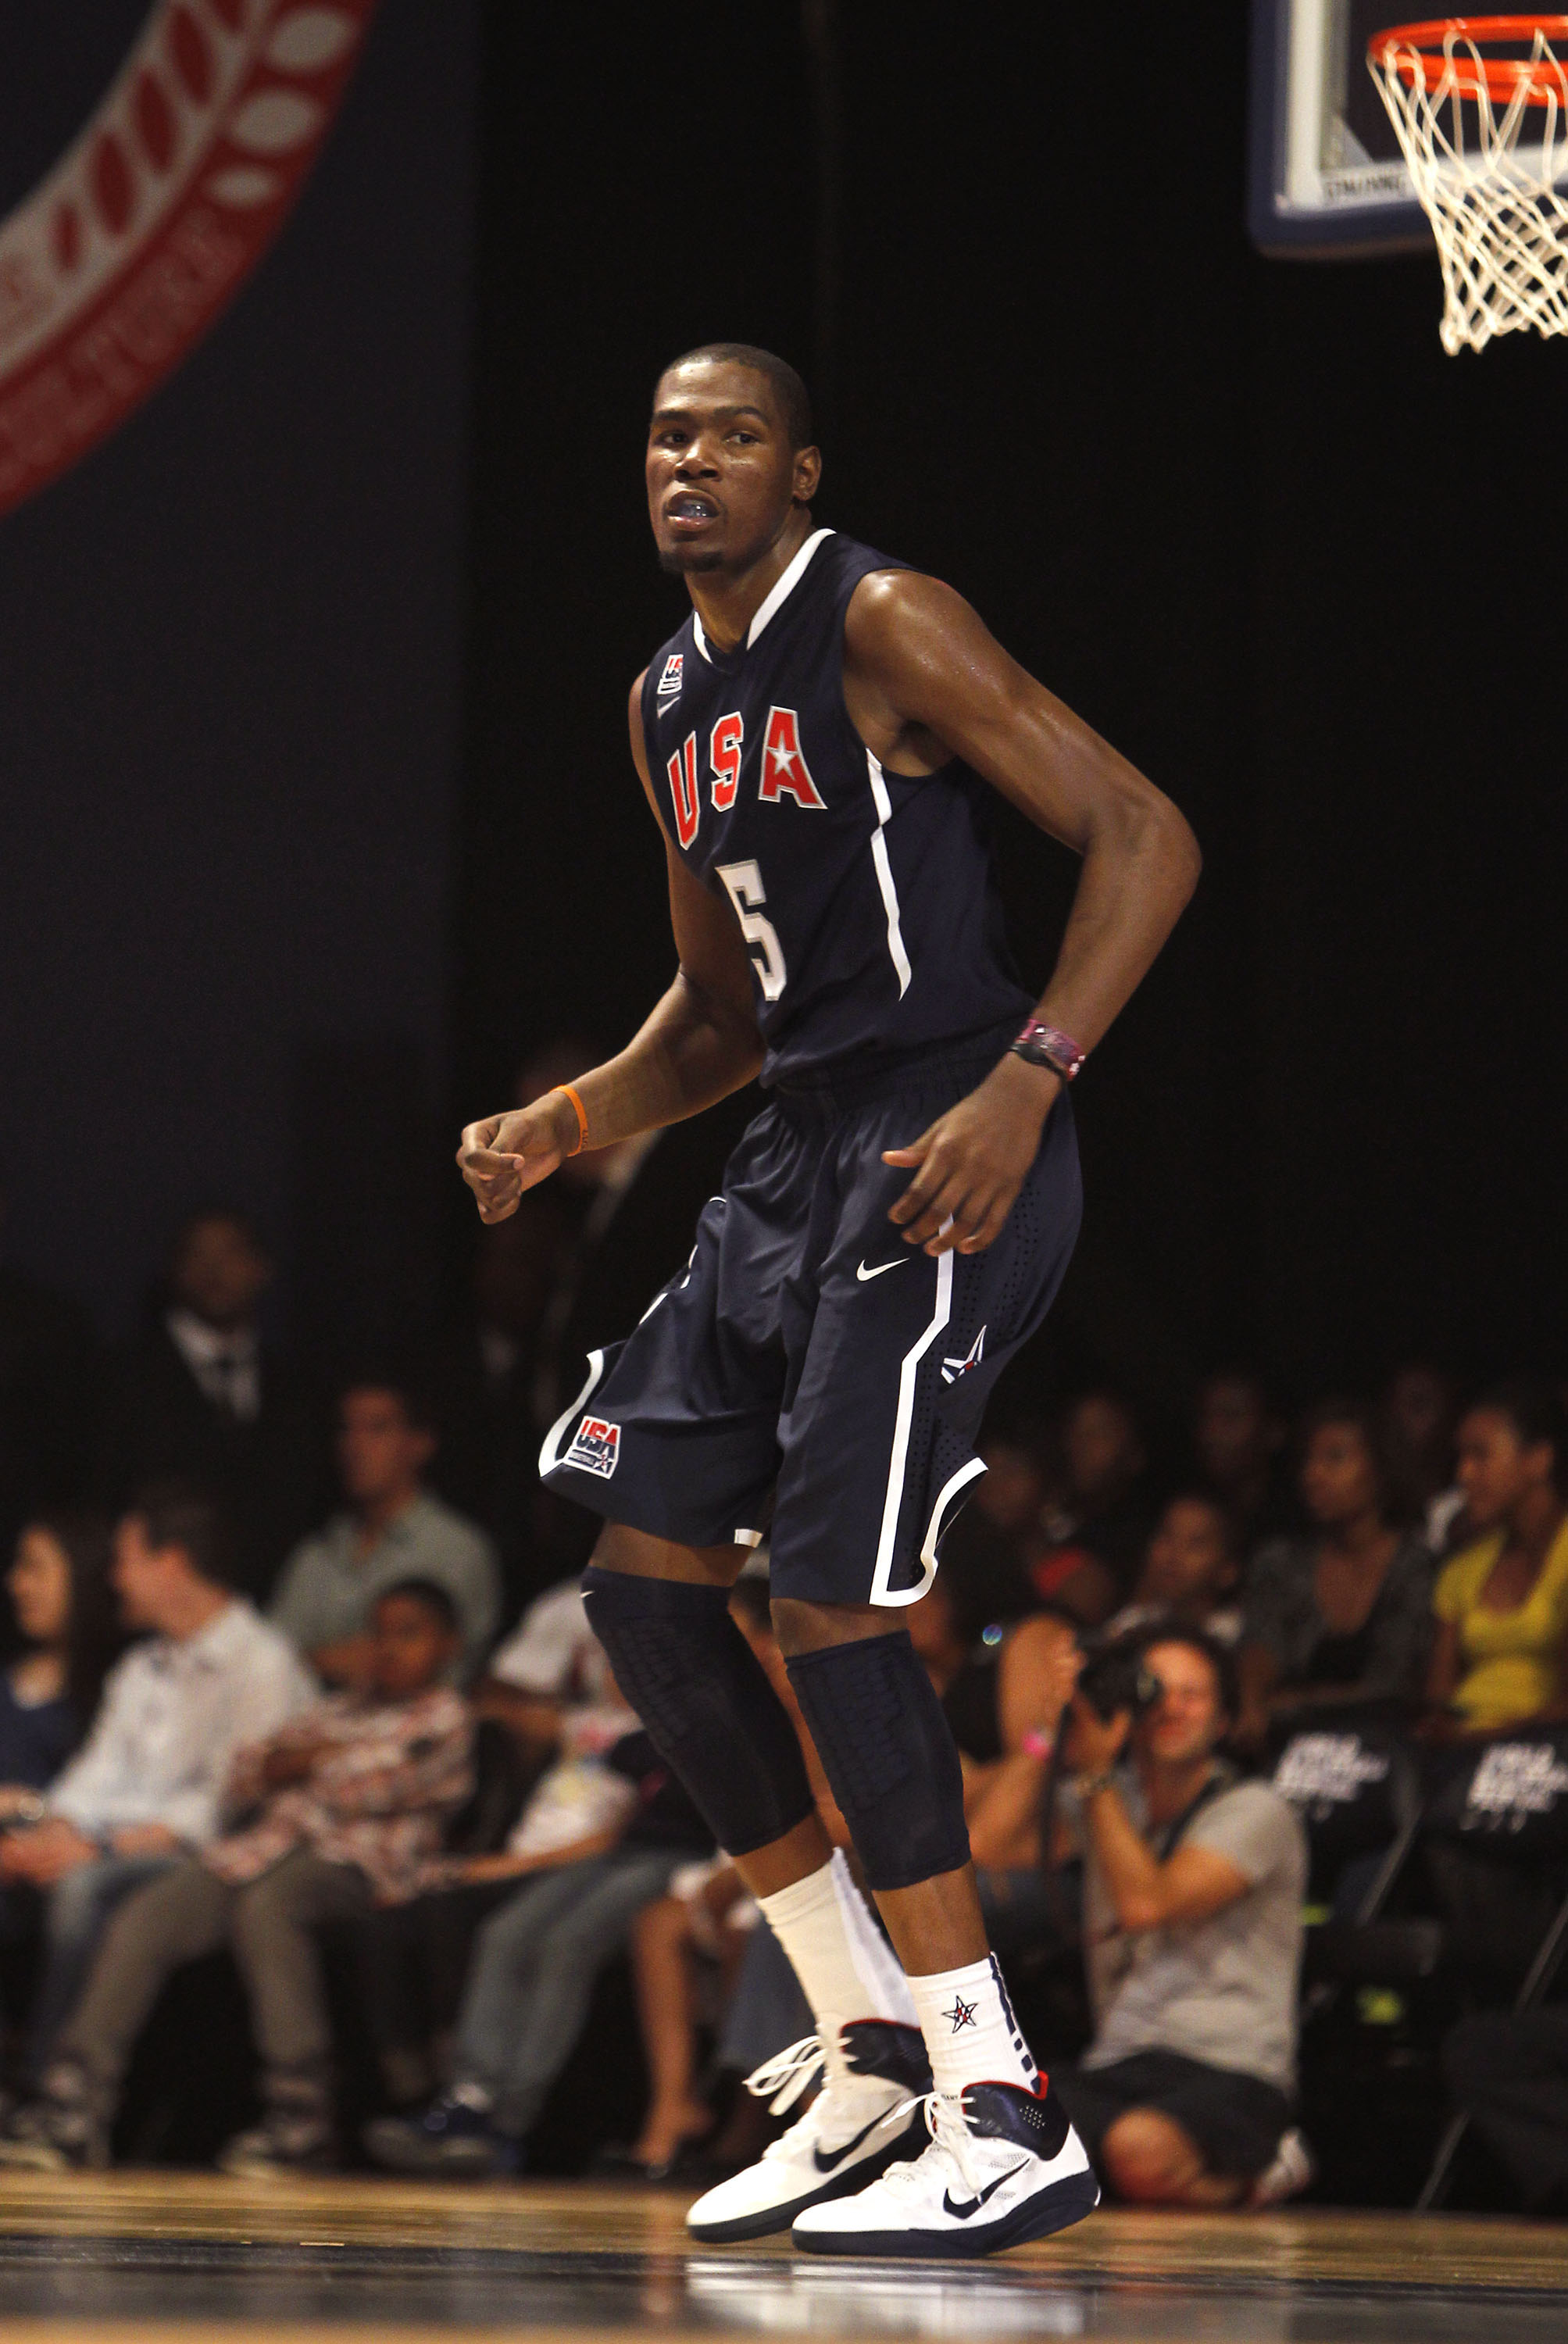 NEW YORK CITY, NY - AUGUST 12:  Kevin Durant #5 looks on during the World Basketball Festival USAB Showcase at Radio City Music Hall on August 12, 2010 in New York City. (Photo by Chris Trotman/Getty Images for Nike)